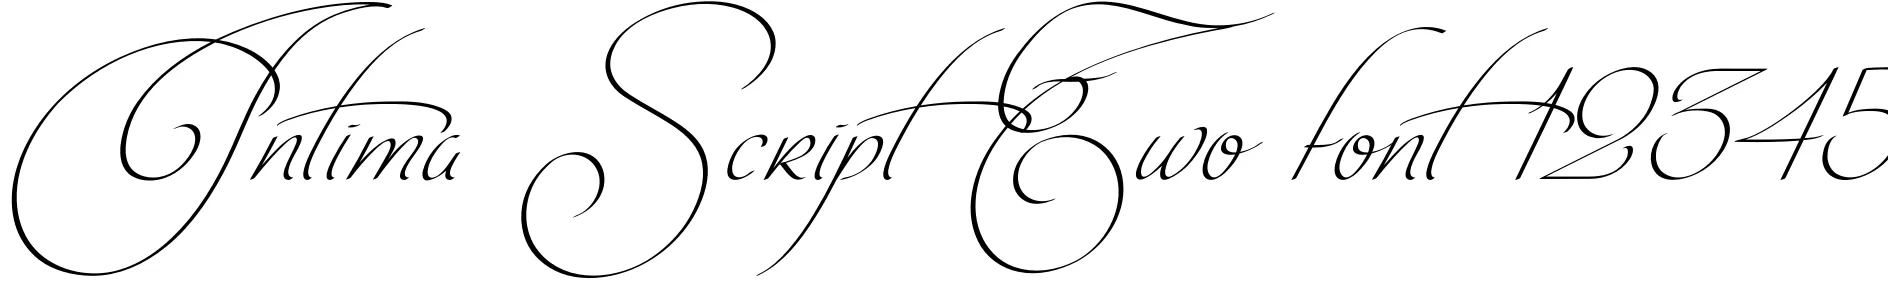 Dynamic Intima Script Two Font Preview https://safirsoft.com